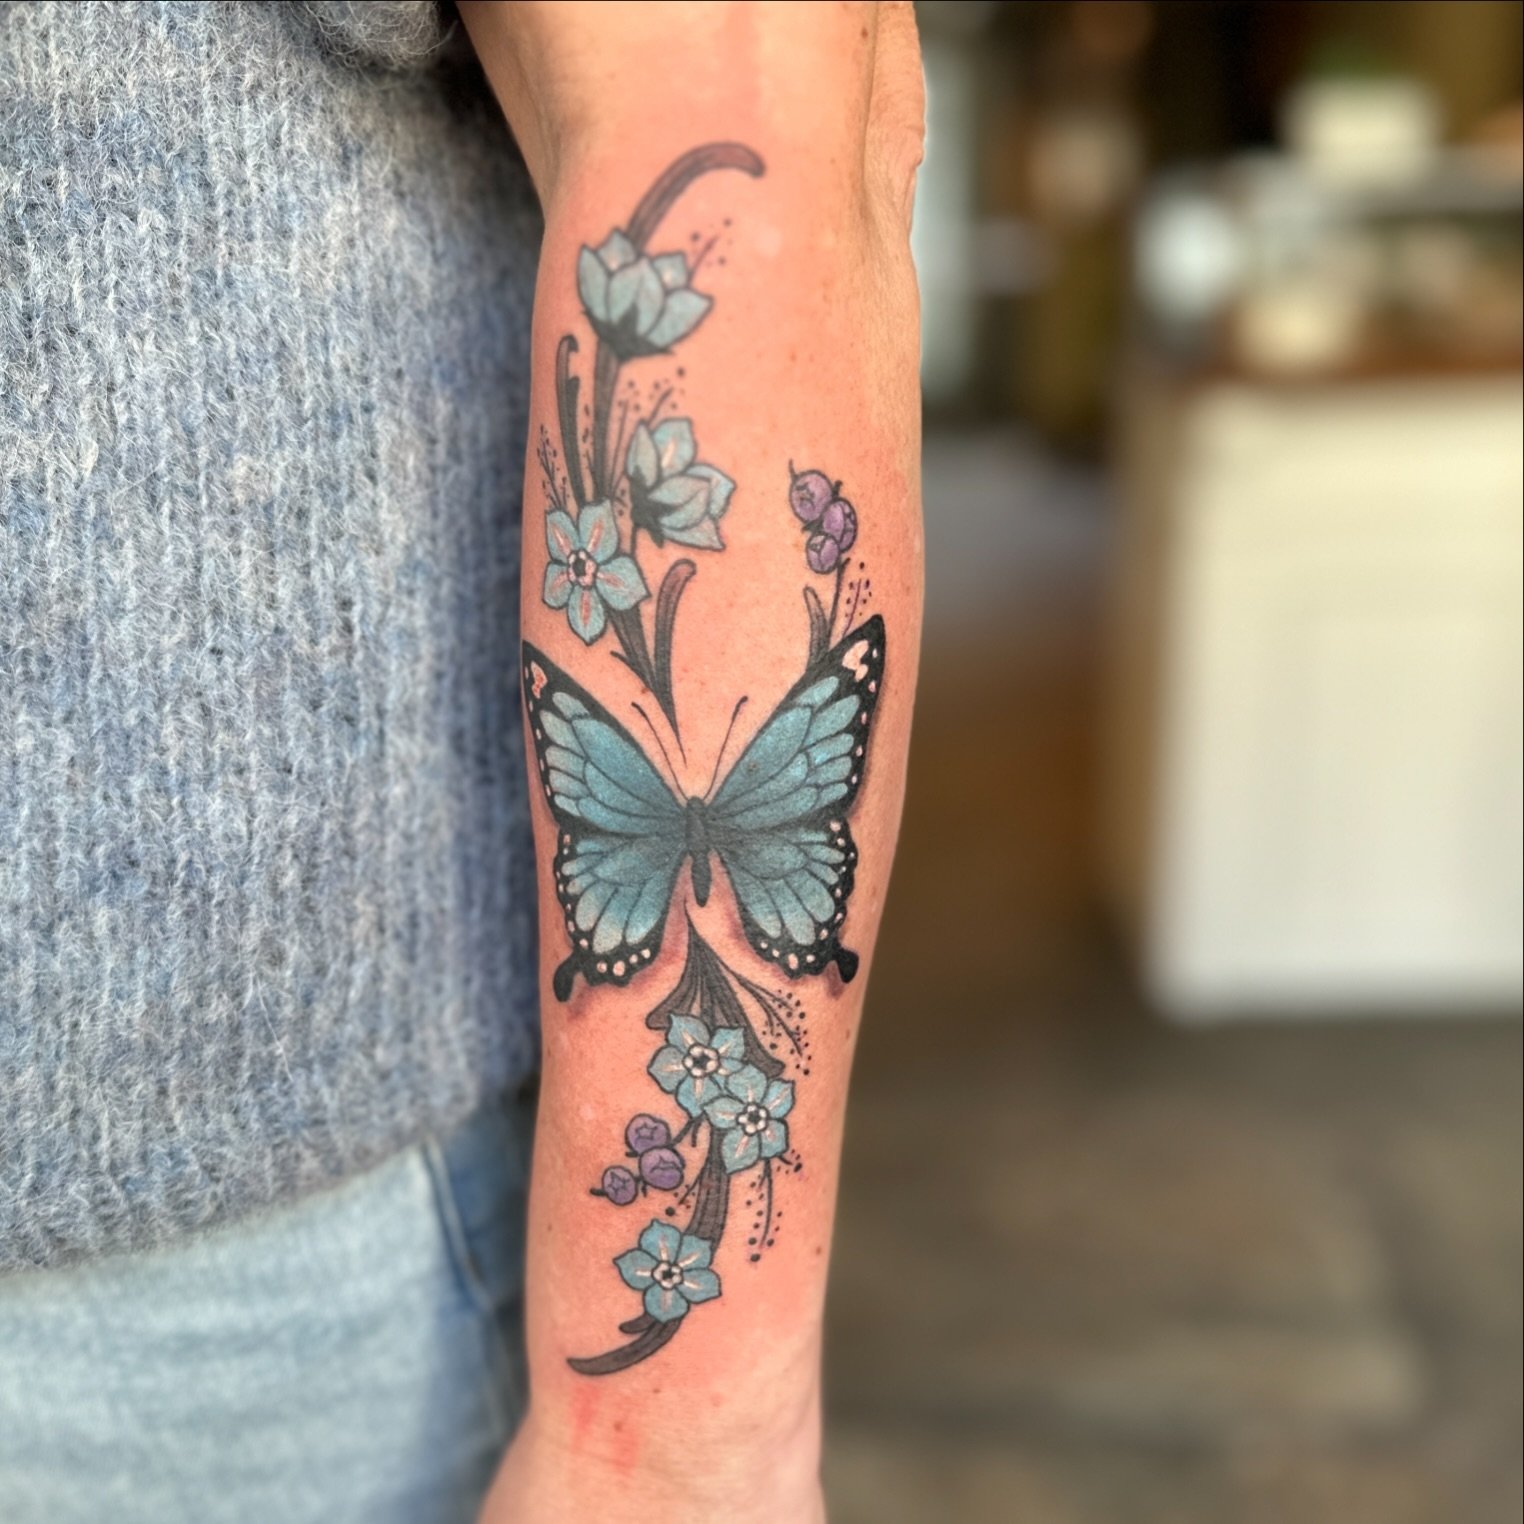 Blue butterfly by Ingrid. For bookings: DM Lets Buzz! or contact her directly at ingrid.letsbuzz@gmail.com #letsbuzz #letsbuzzbergen #letsbuzztattoo #bergen #bergennorway #tattoobergen  #norwegiantattooers #tattoo #tattooinspiration  #butterfly #butt